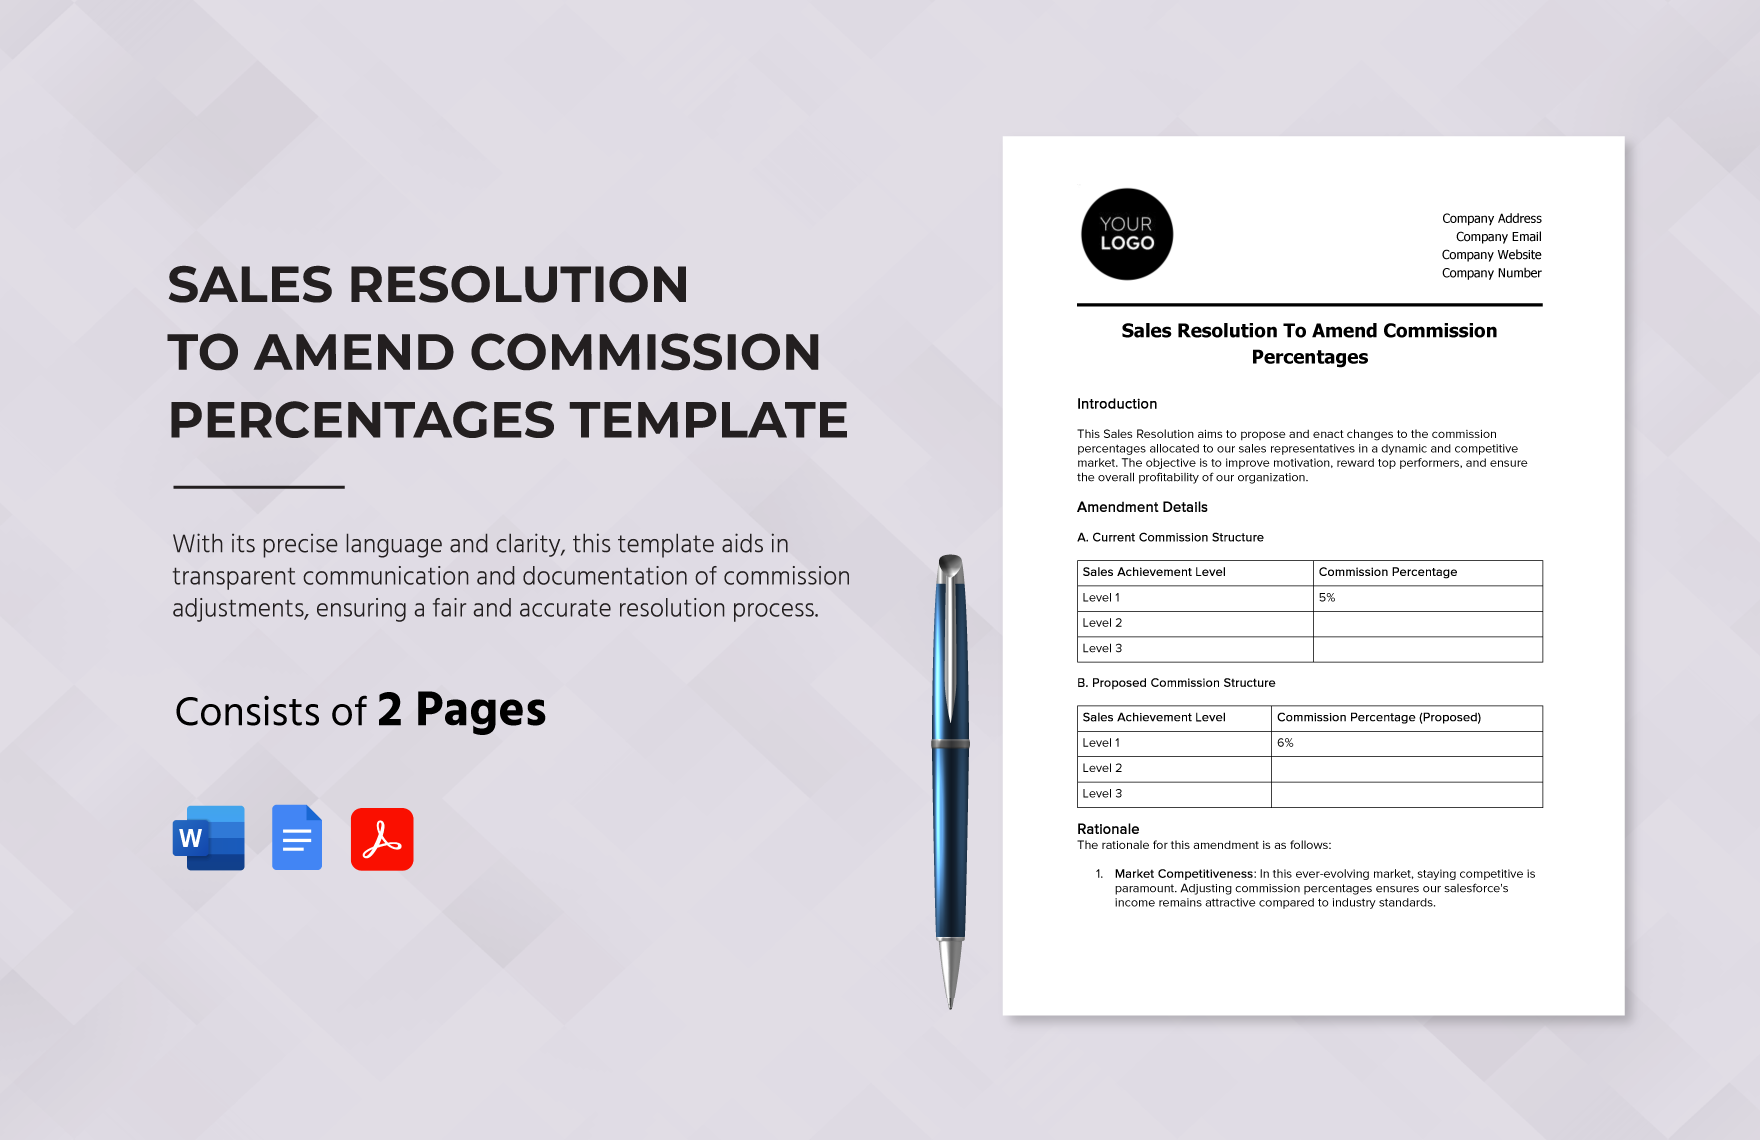 Sales Resolution to Amend Commission Percentages Template